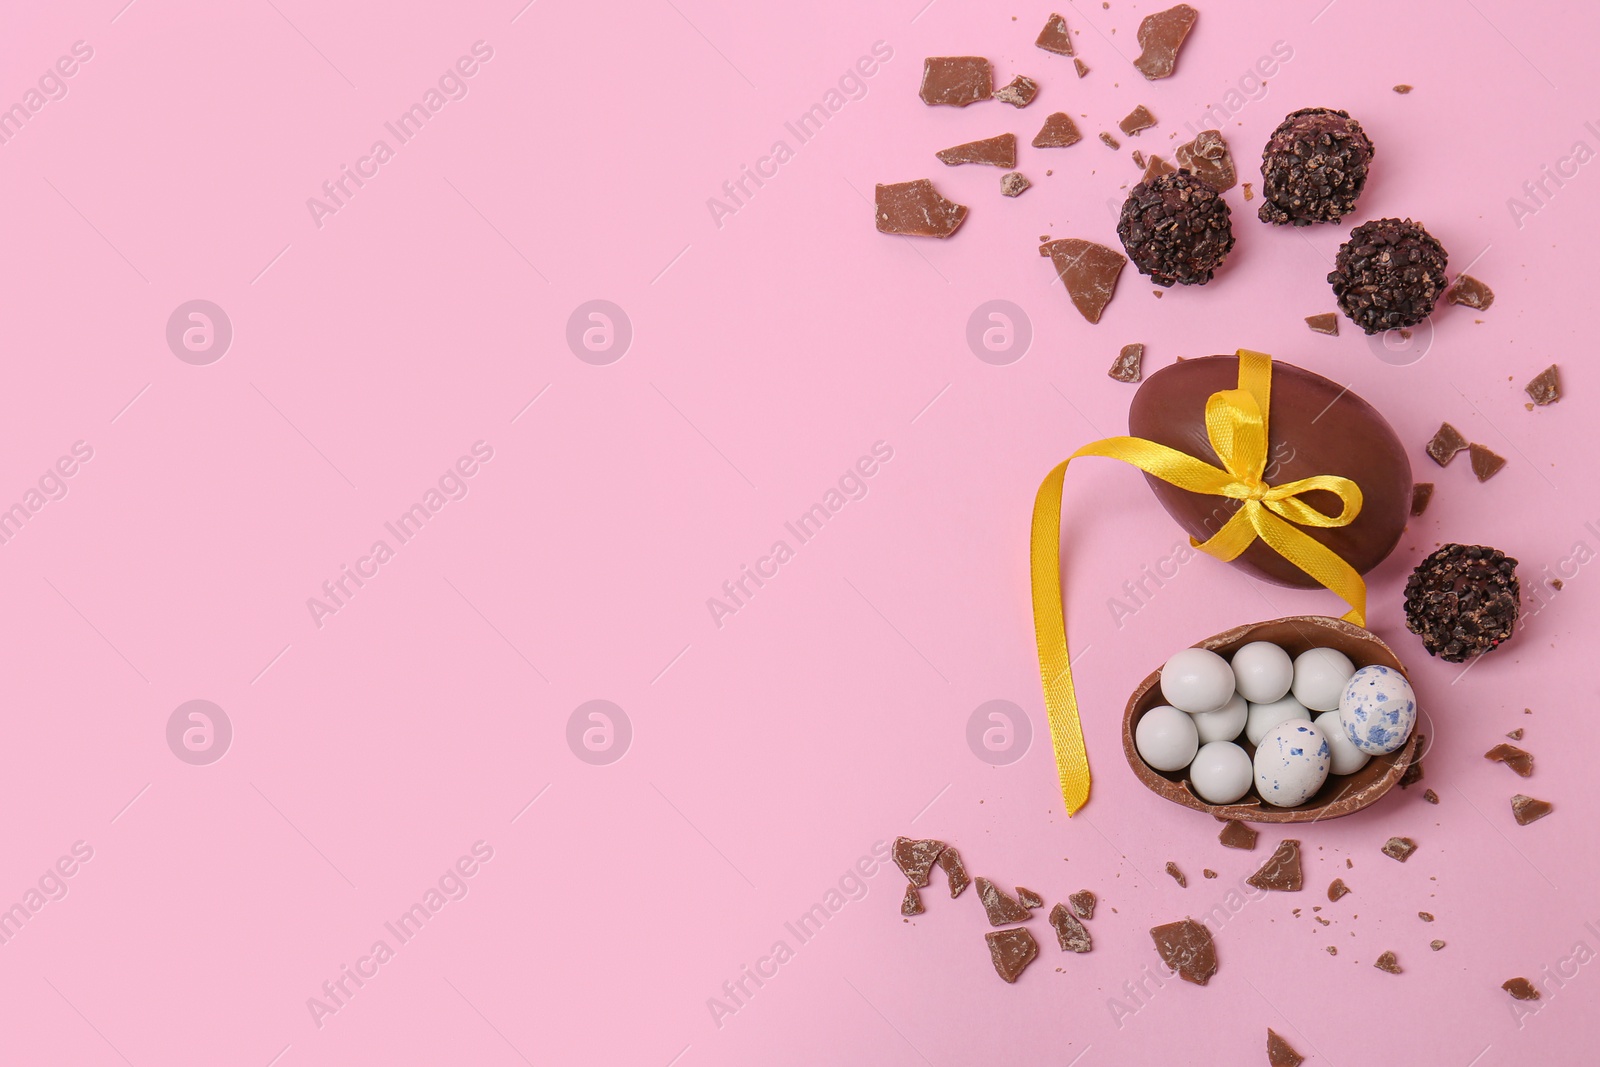 Photo of Tasty chocolate eggs and candies on pink background, flat lay. Space for text